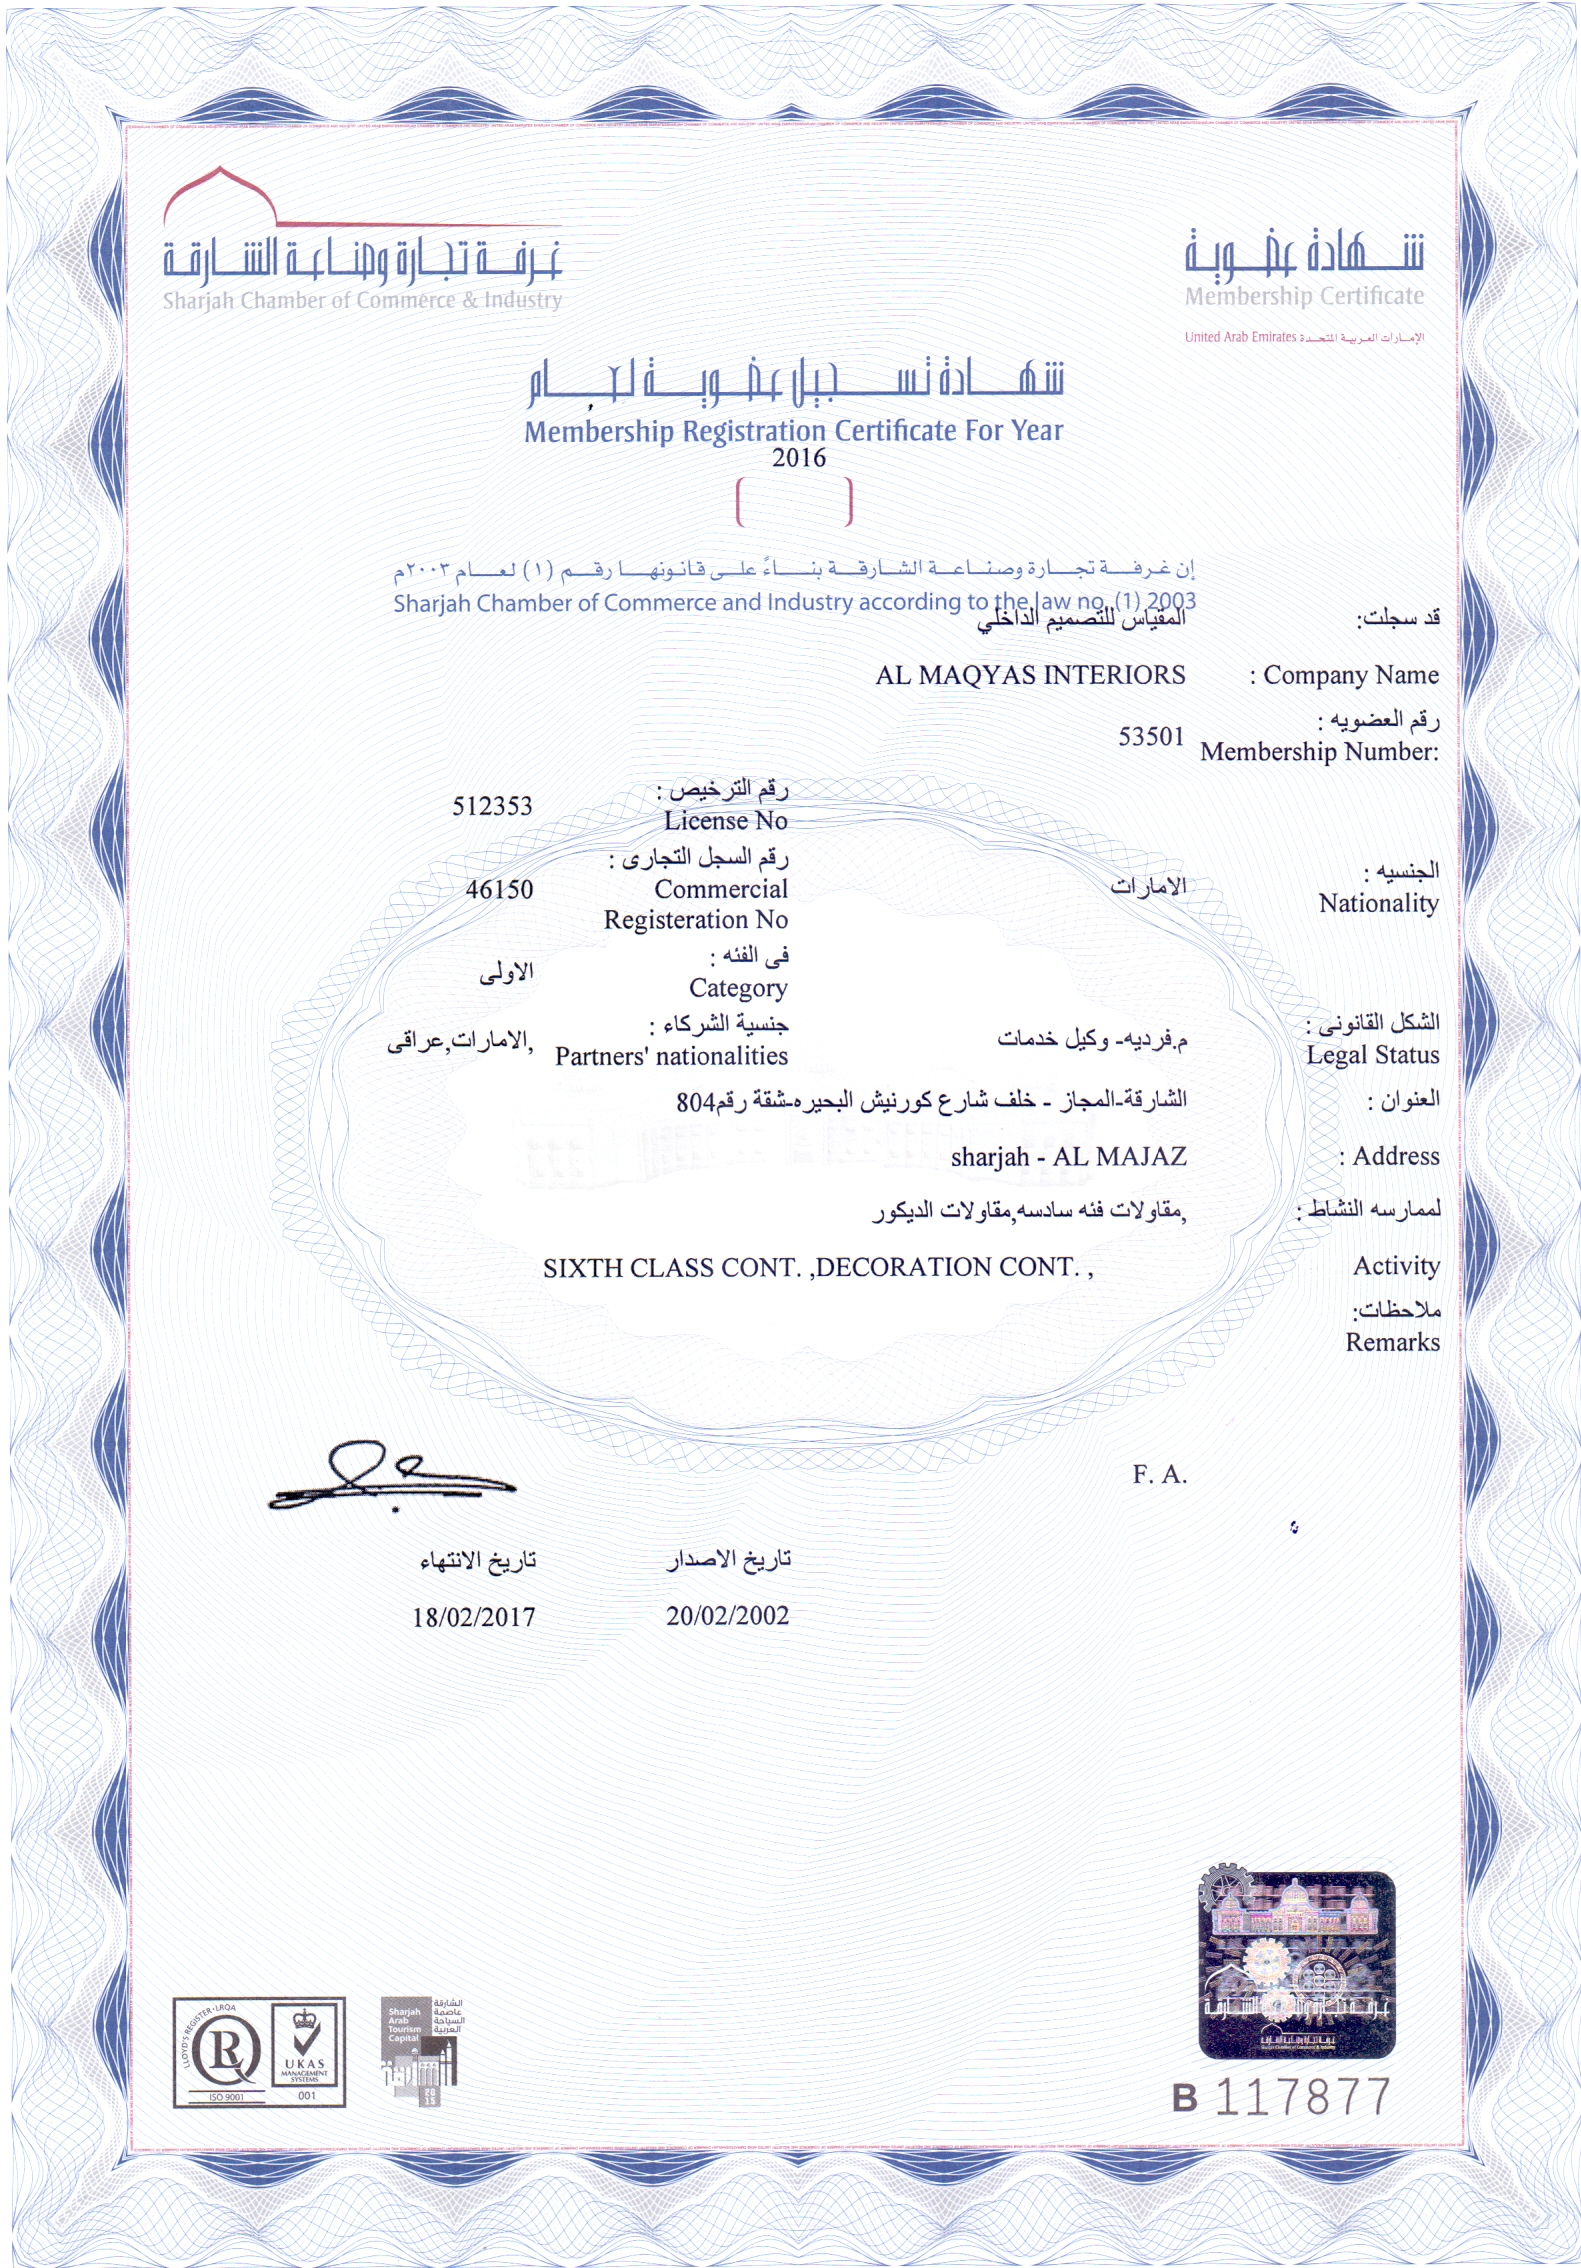 Membership Registration Certificate for year 2016 - Chamber of Commerce